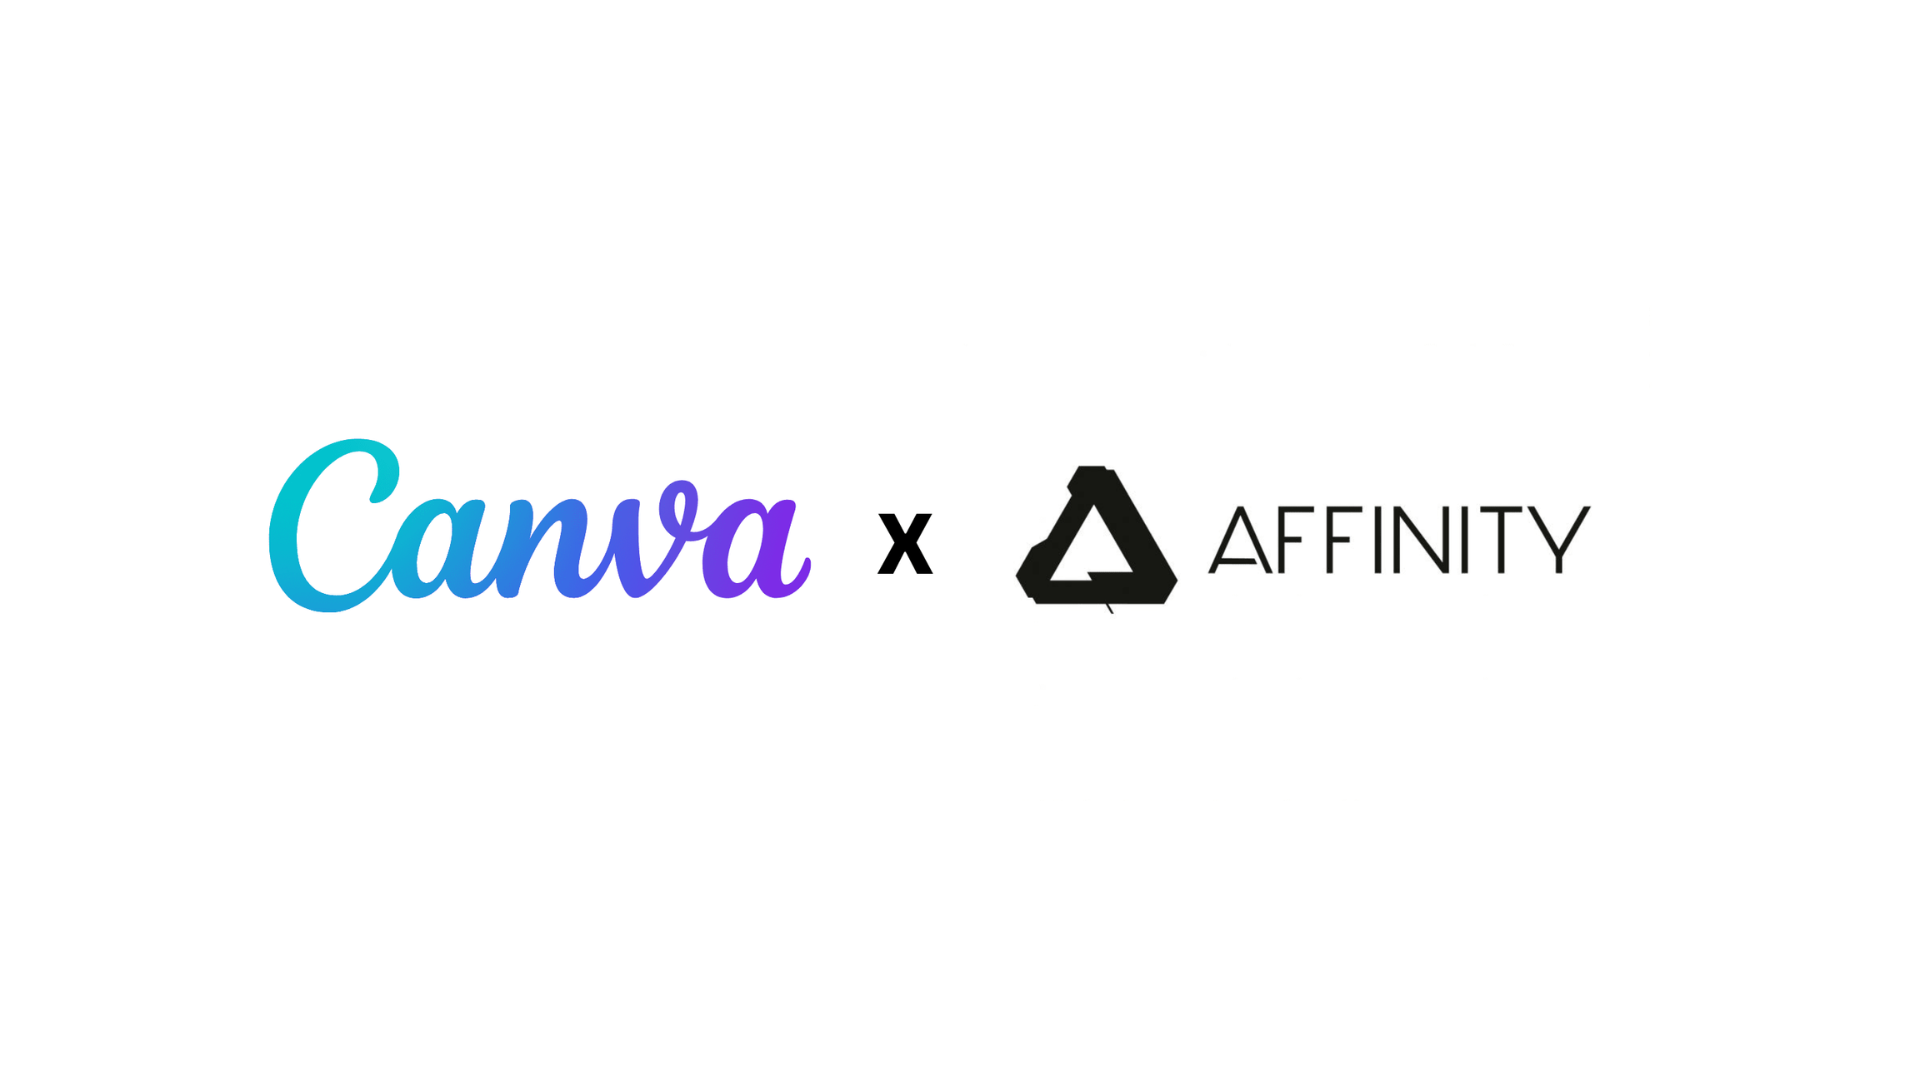 Canva Acquires Affinity for $380M to Rival Adobe